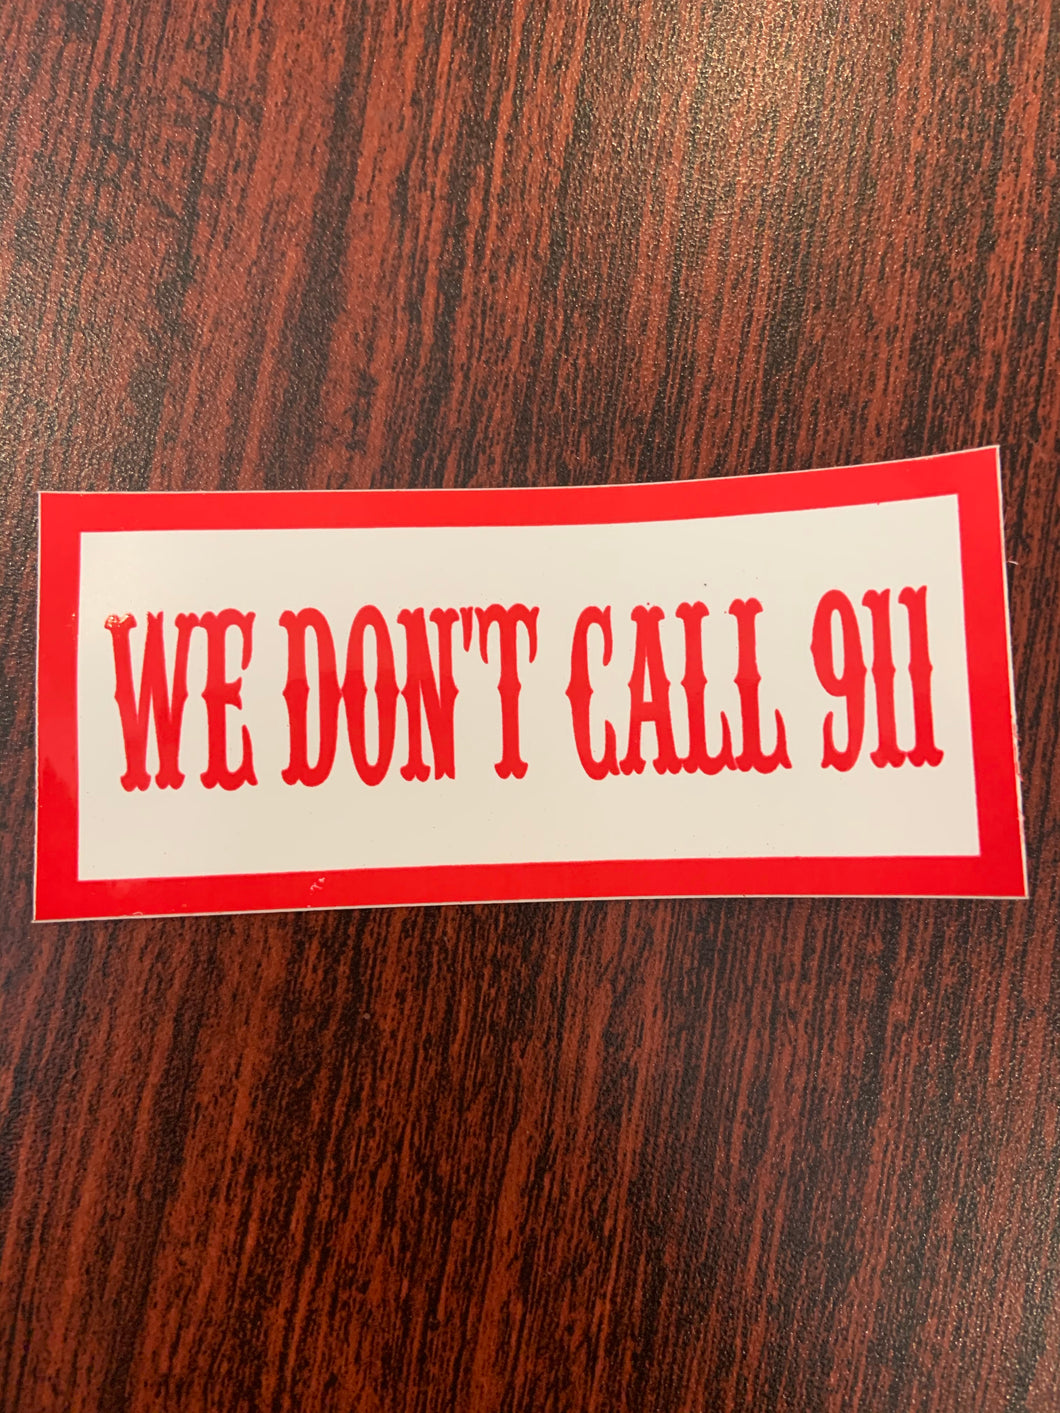 We don’t call 911